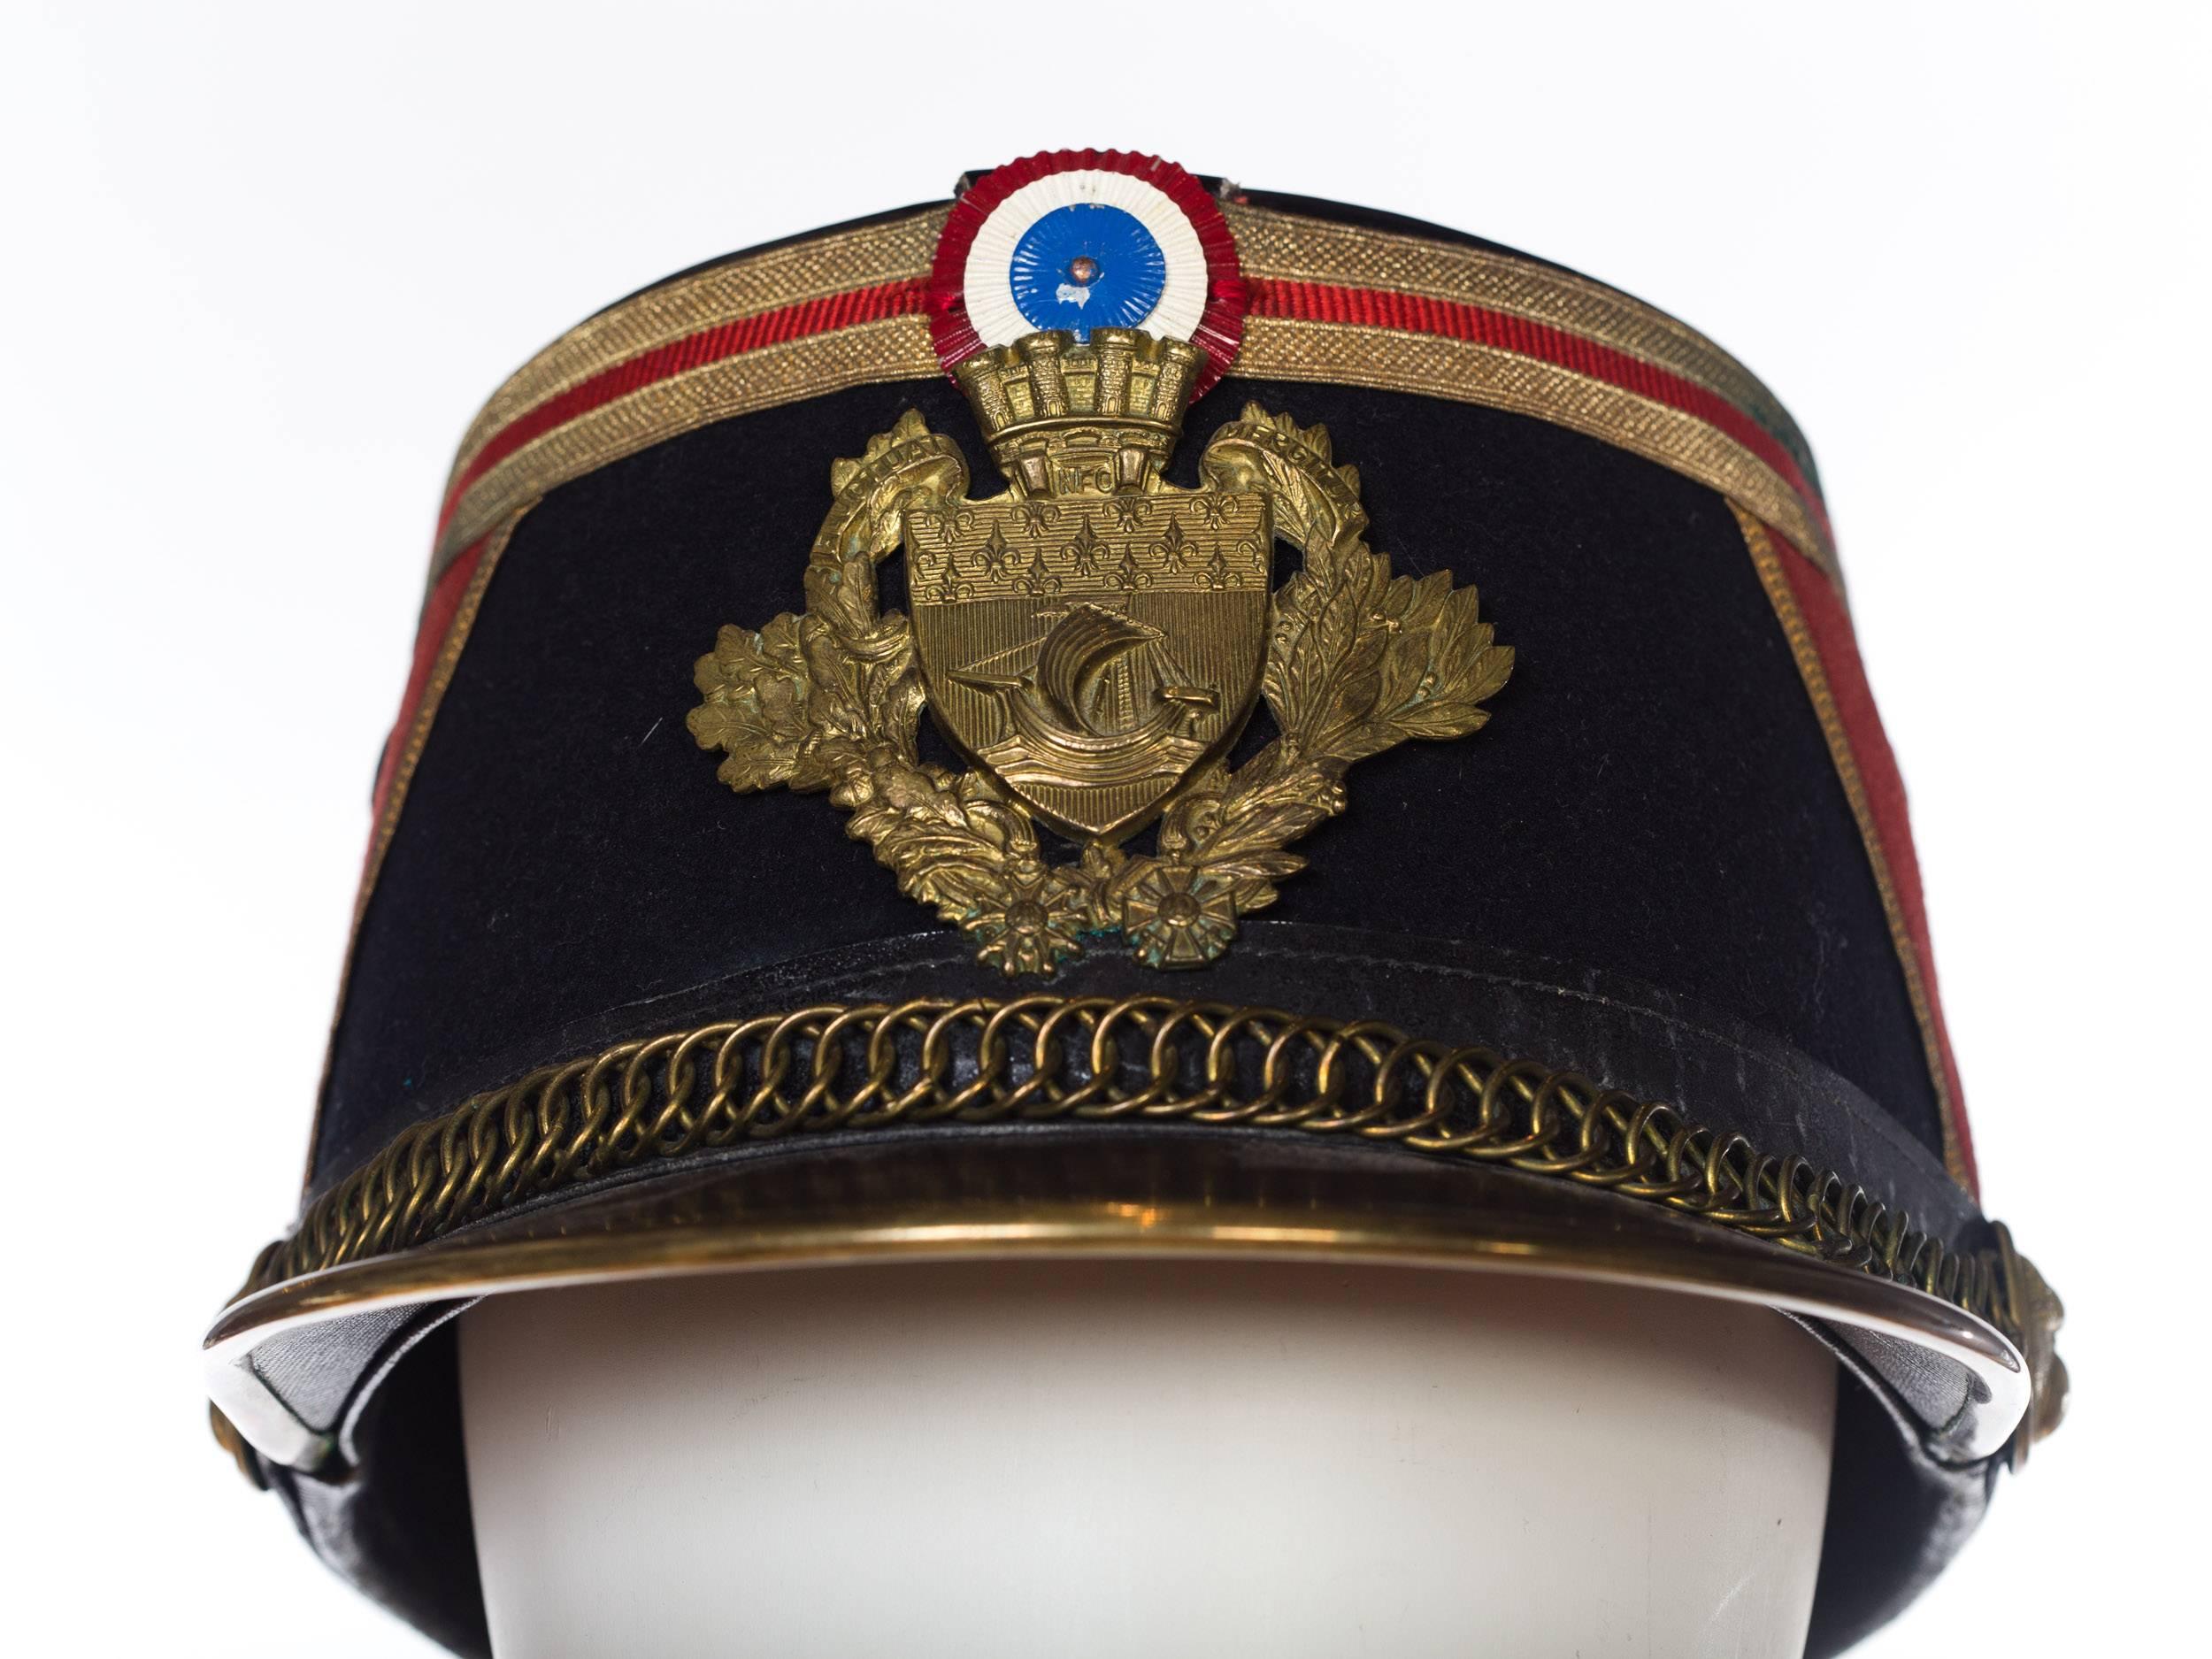 Accessories Hats & Caps Helmets Military Helmets Victorian officers late 19th century Flap mounted on Black richly embroidered with crown VR Pouch Sabretache with adjustable waist belt 